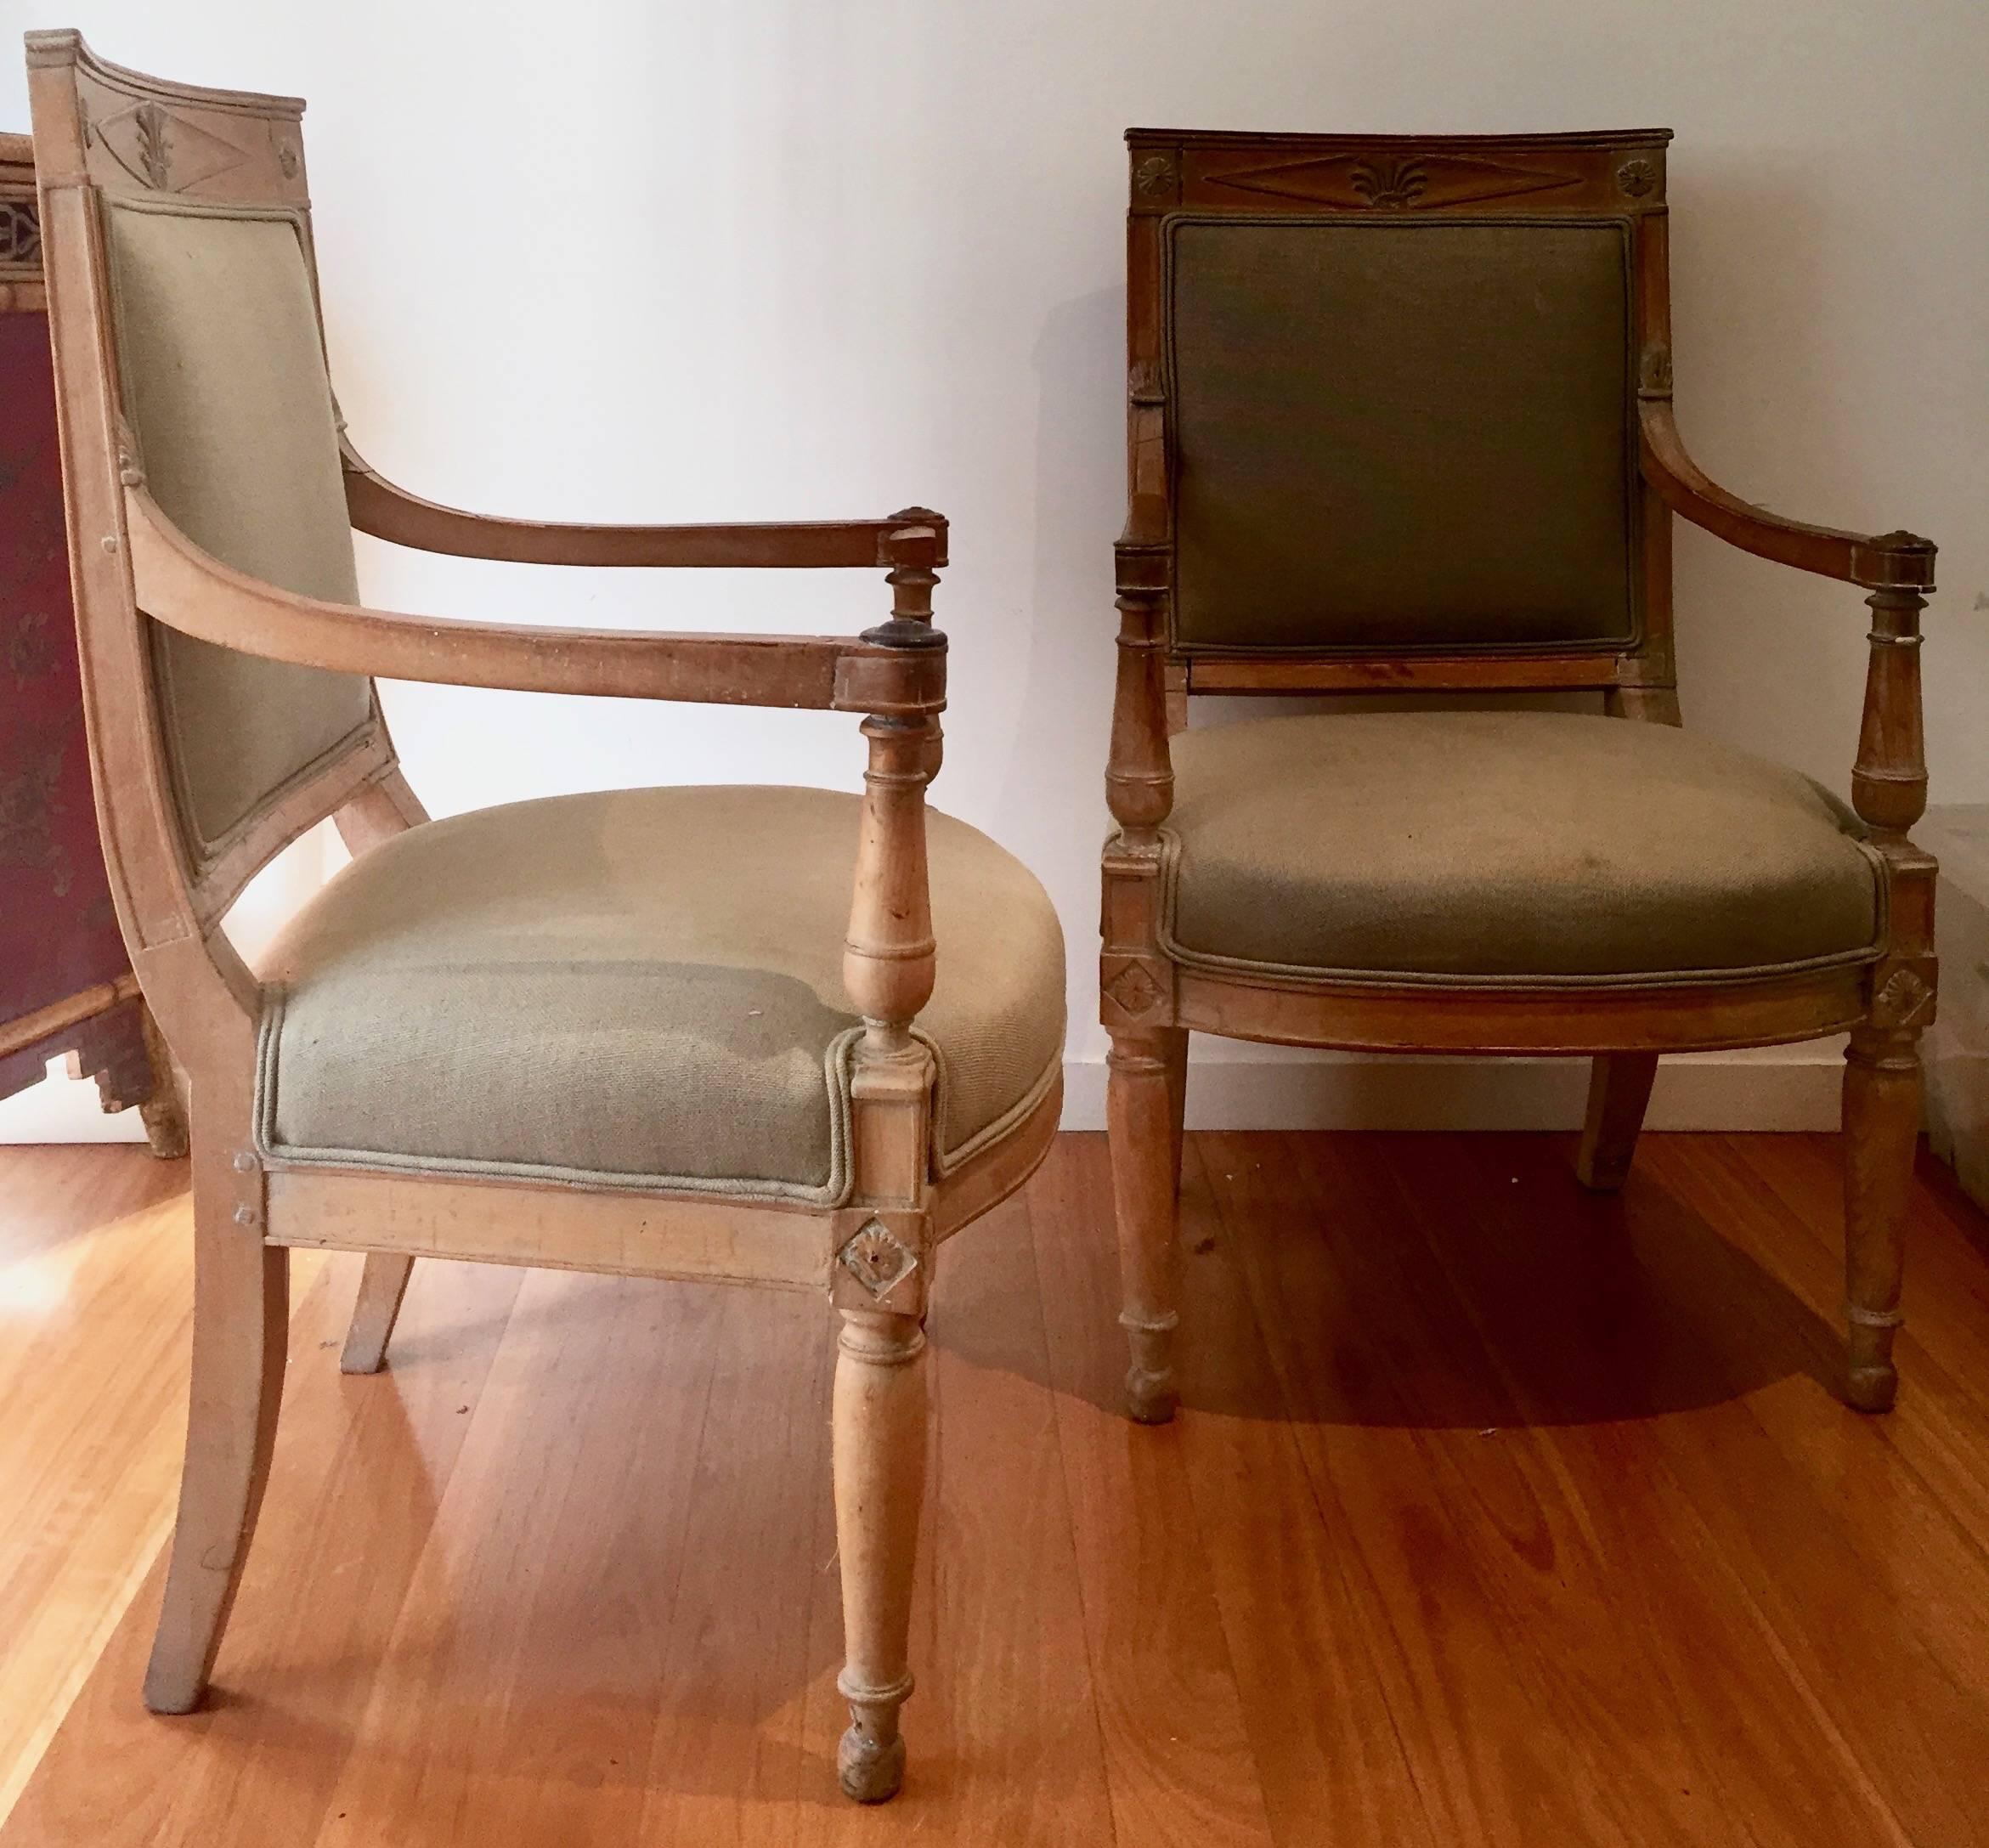 Pair of French late 18th century Directoire period fauteuils in beech with classical carved motives and sabre legs,
France, circa 1799.